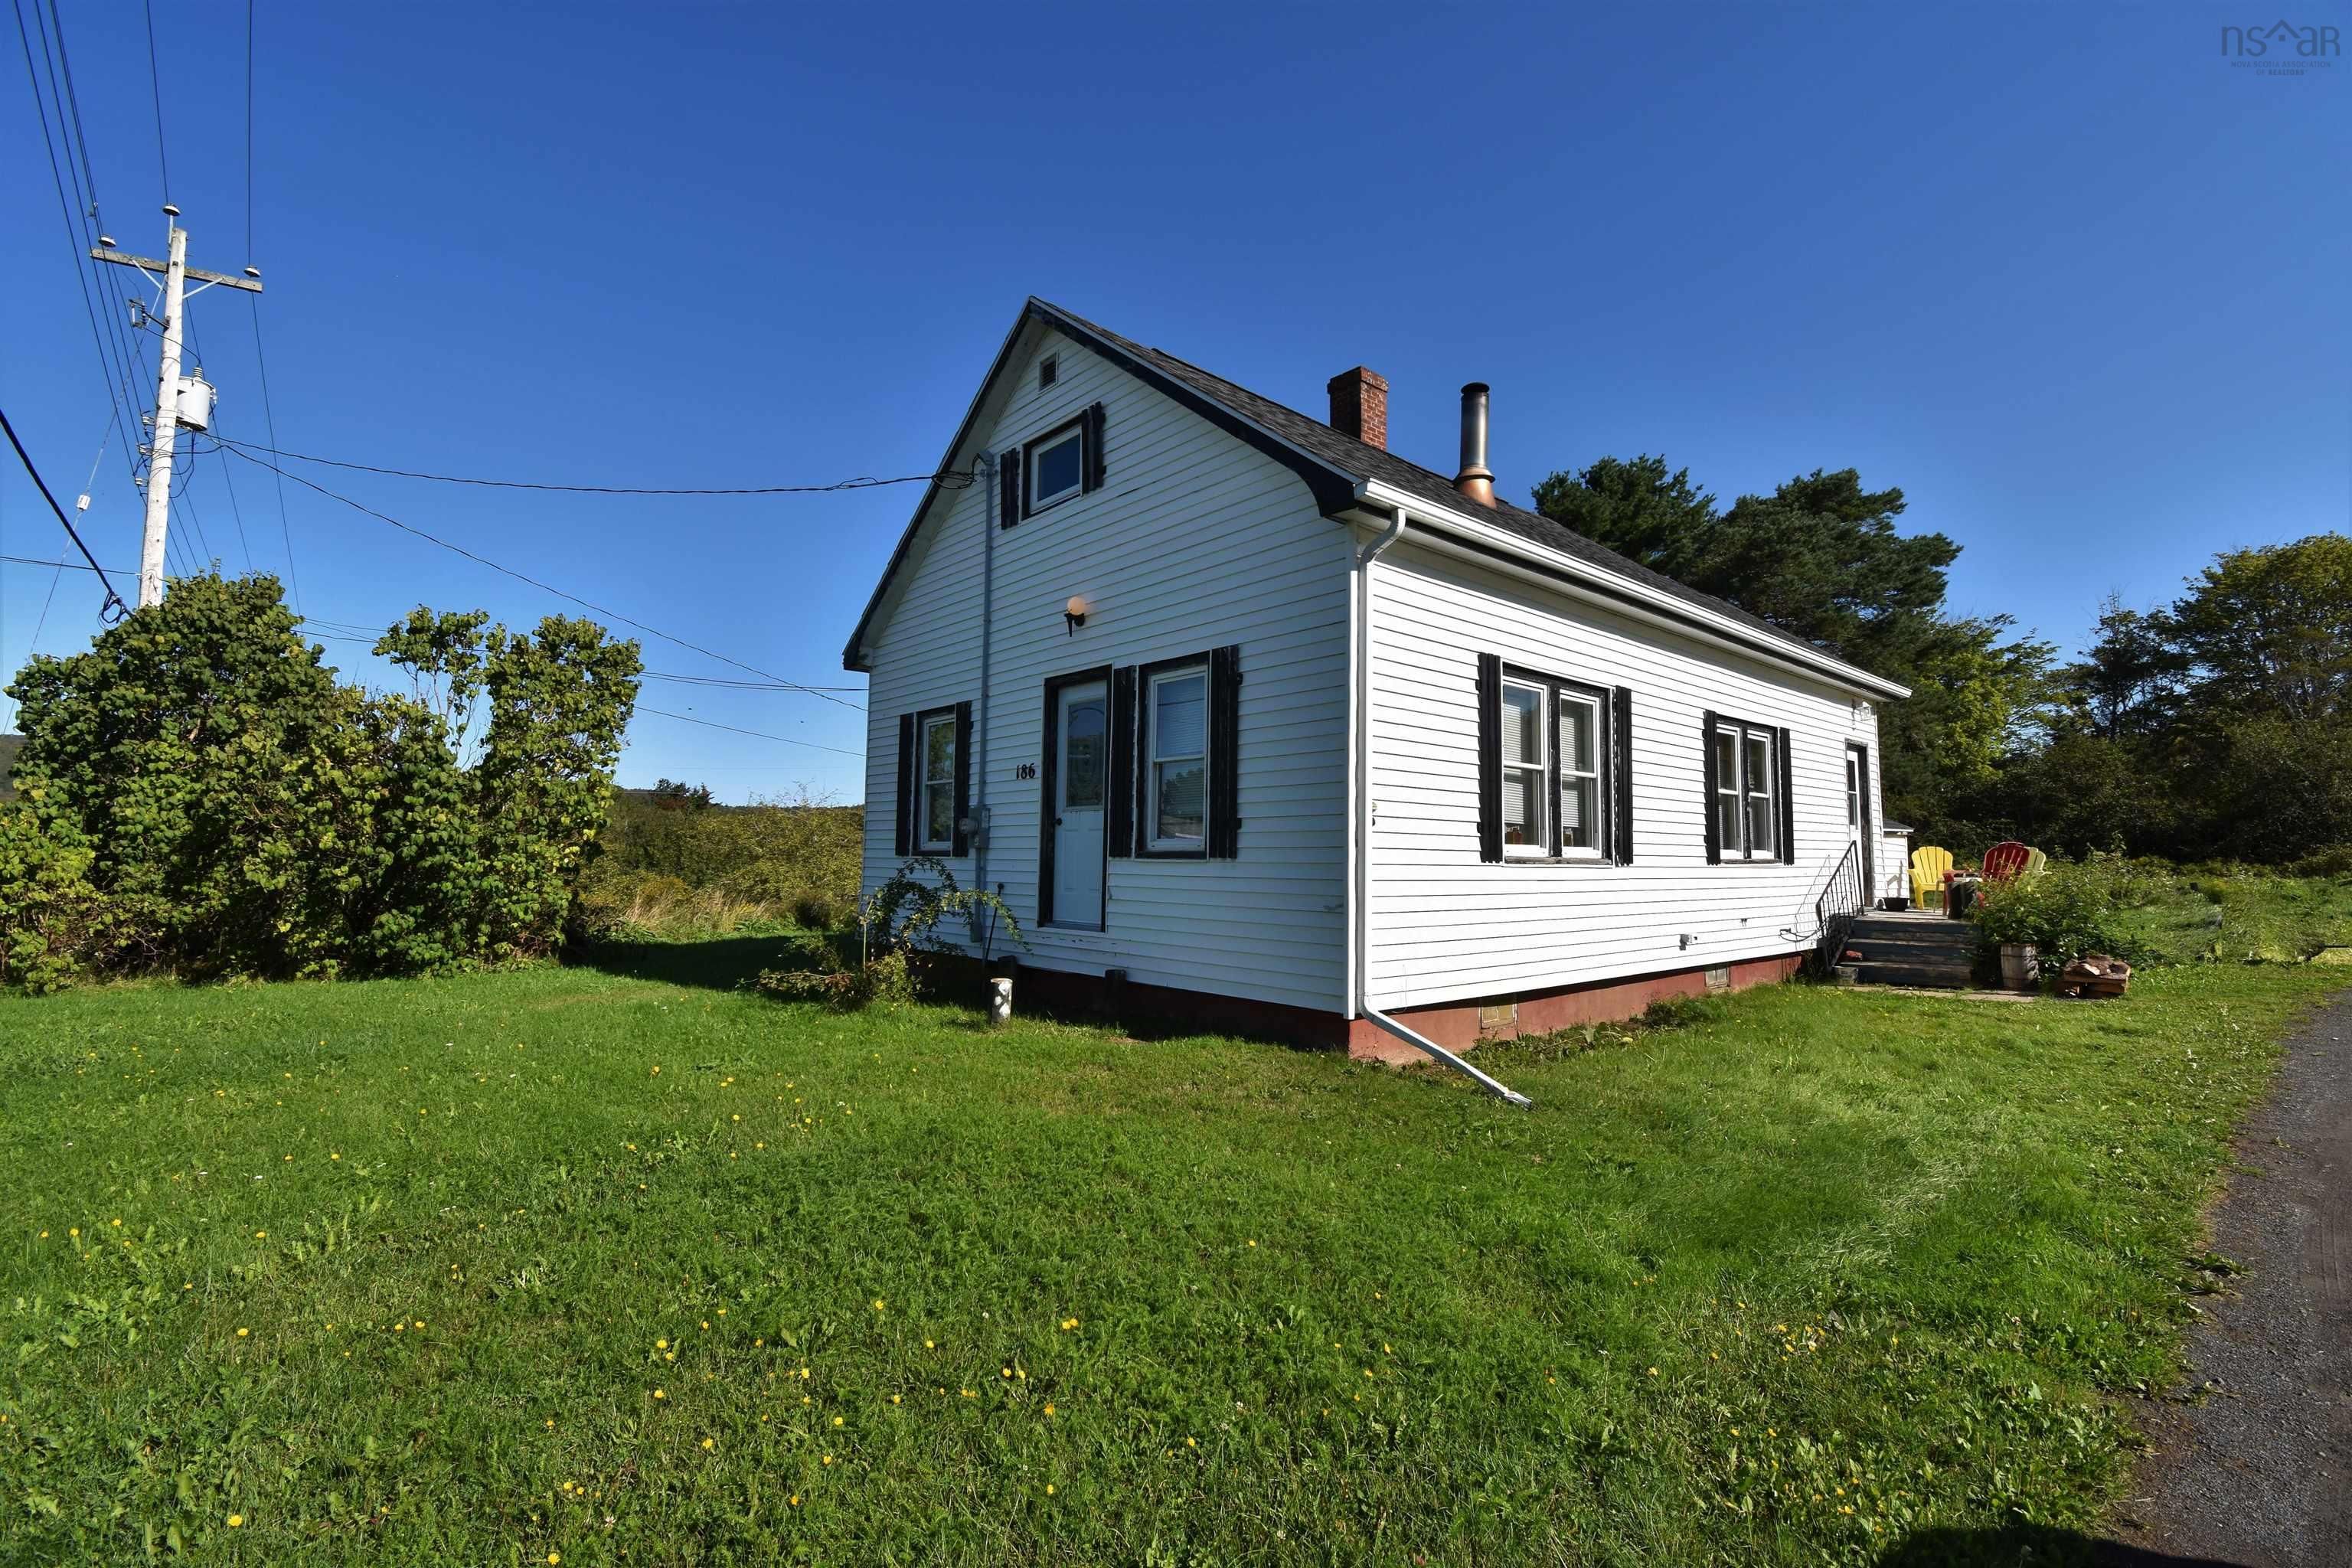 Main Photo: 186 Culloden Road in Mount Pleasant: 401-Digby County Residential for sale (Annapolis Valley)  : MLS®# 202129266